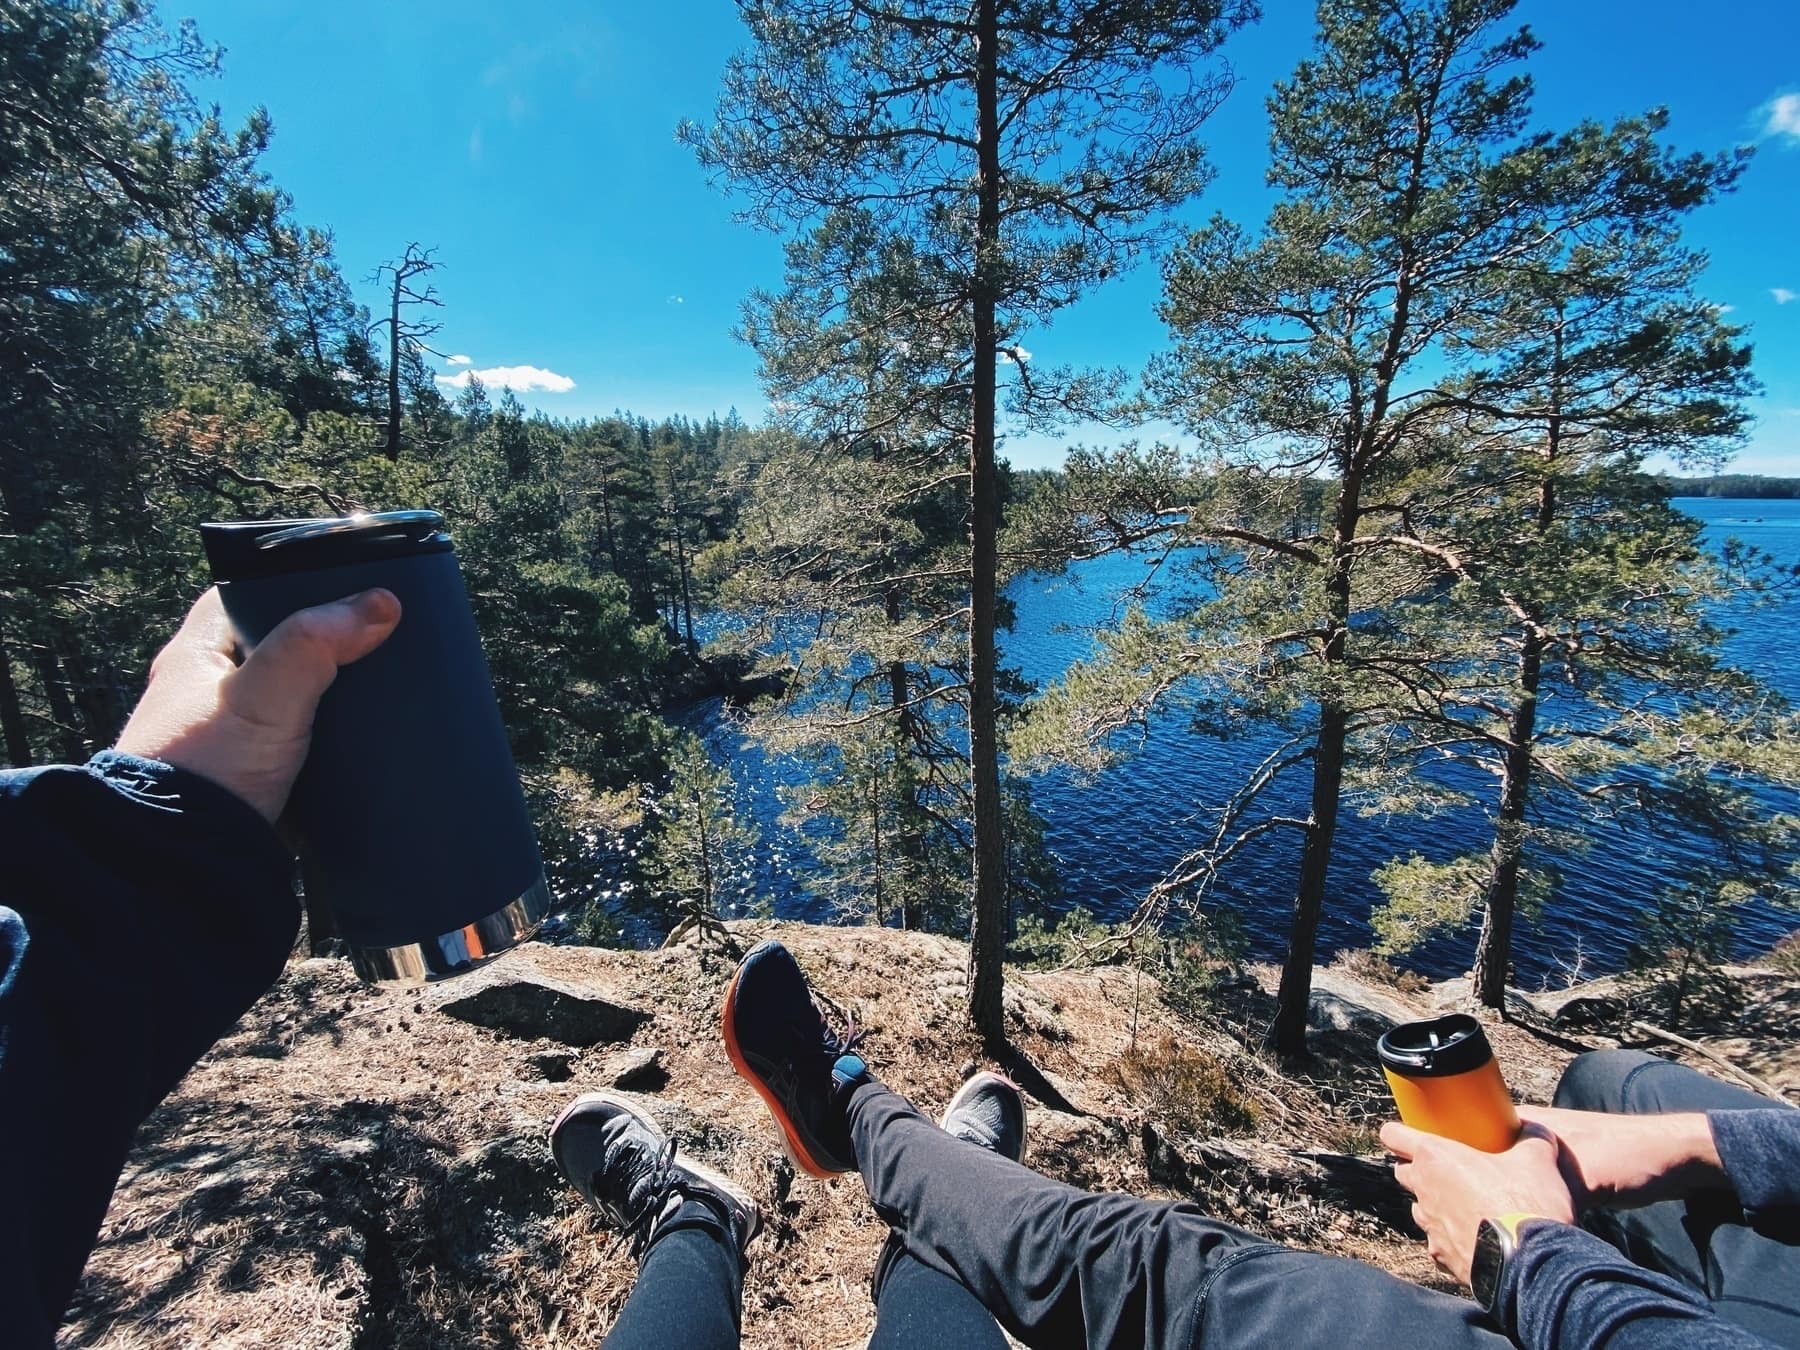 A couple sitting outdoors, sipping coffee from thermos mugs. Only their arms and legs are visible in the frame. The view over a lake is magnificent.